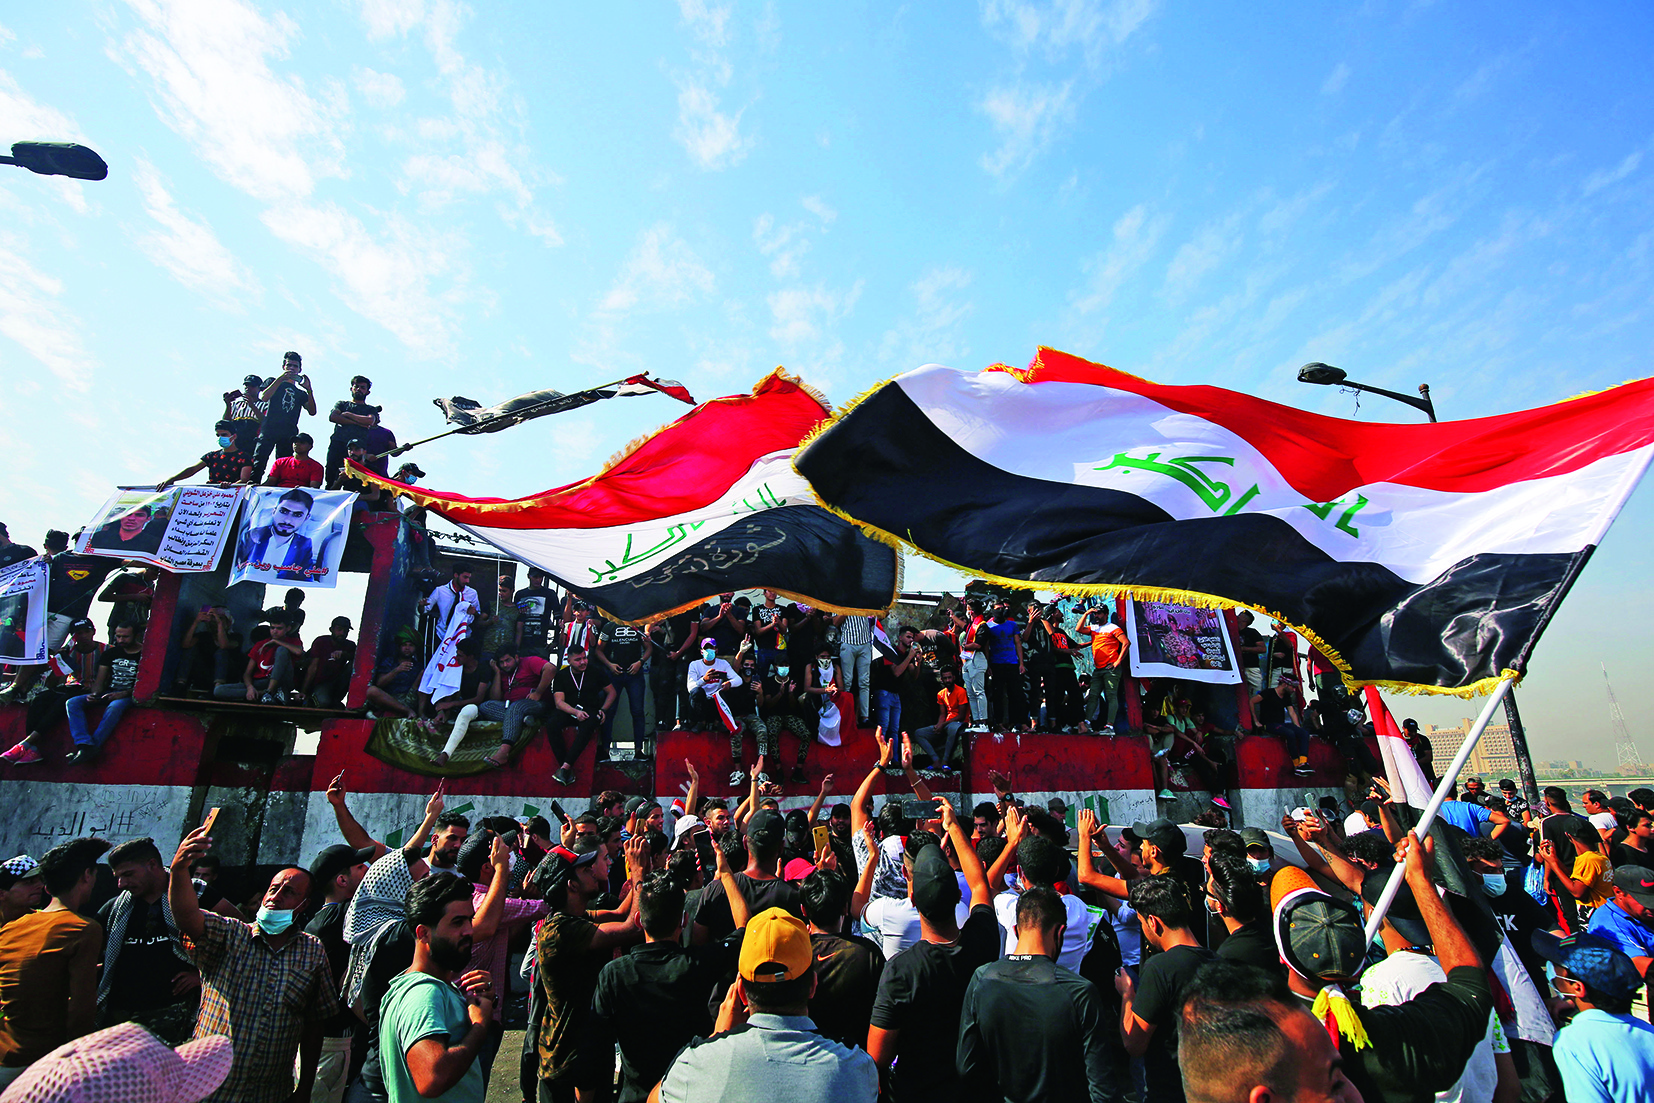 TOPSHOT - Iraqi demonstrators wave flags as they gather in Tahrir Square in the centre of the capital Baghdad on October 25, 2020, to mark the first anniversary of a massive anti-government movement demanding the ouster of the entire ruling class accused of corruption. - Thousands of Iraqis headed to the capital Baghdad's iconic Tahrir Square and the Green Zone, where authorities sit, to mark the first anniversary of an ongoing revolt against the country's stagnant political class. (Photo by AHMAD AL-RUBAYE / AFP)